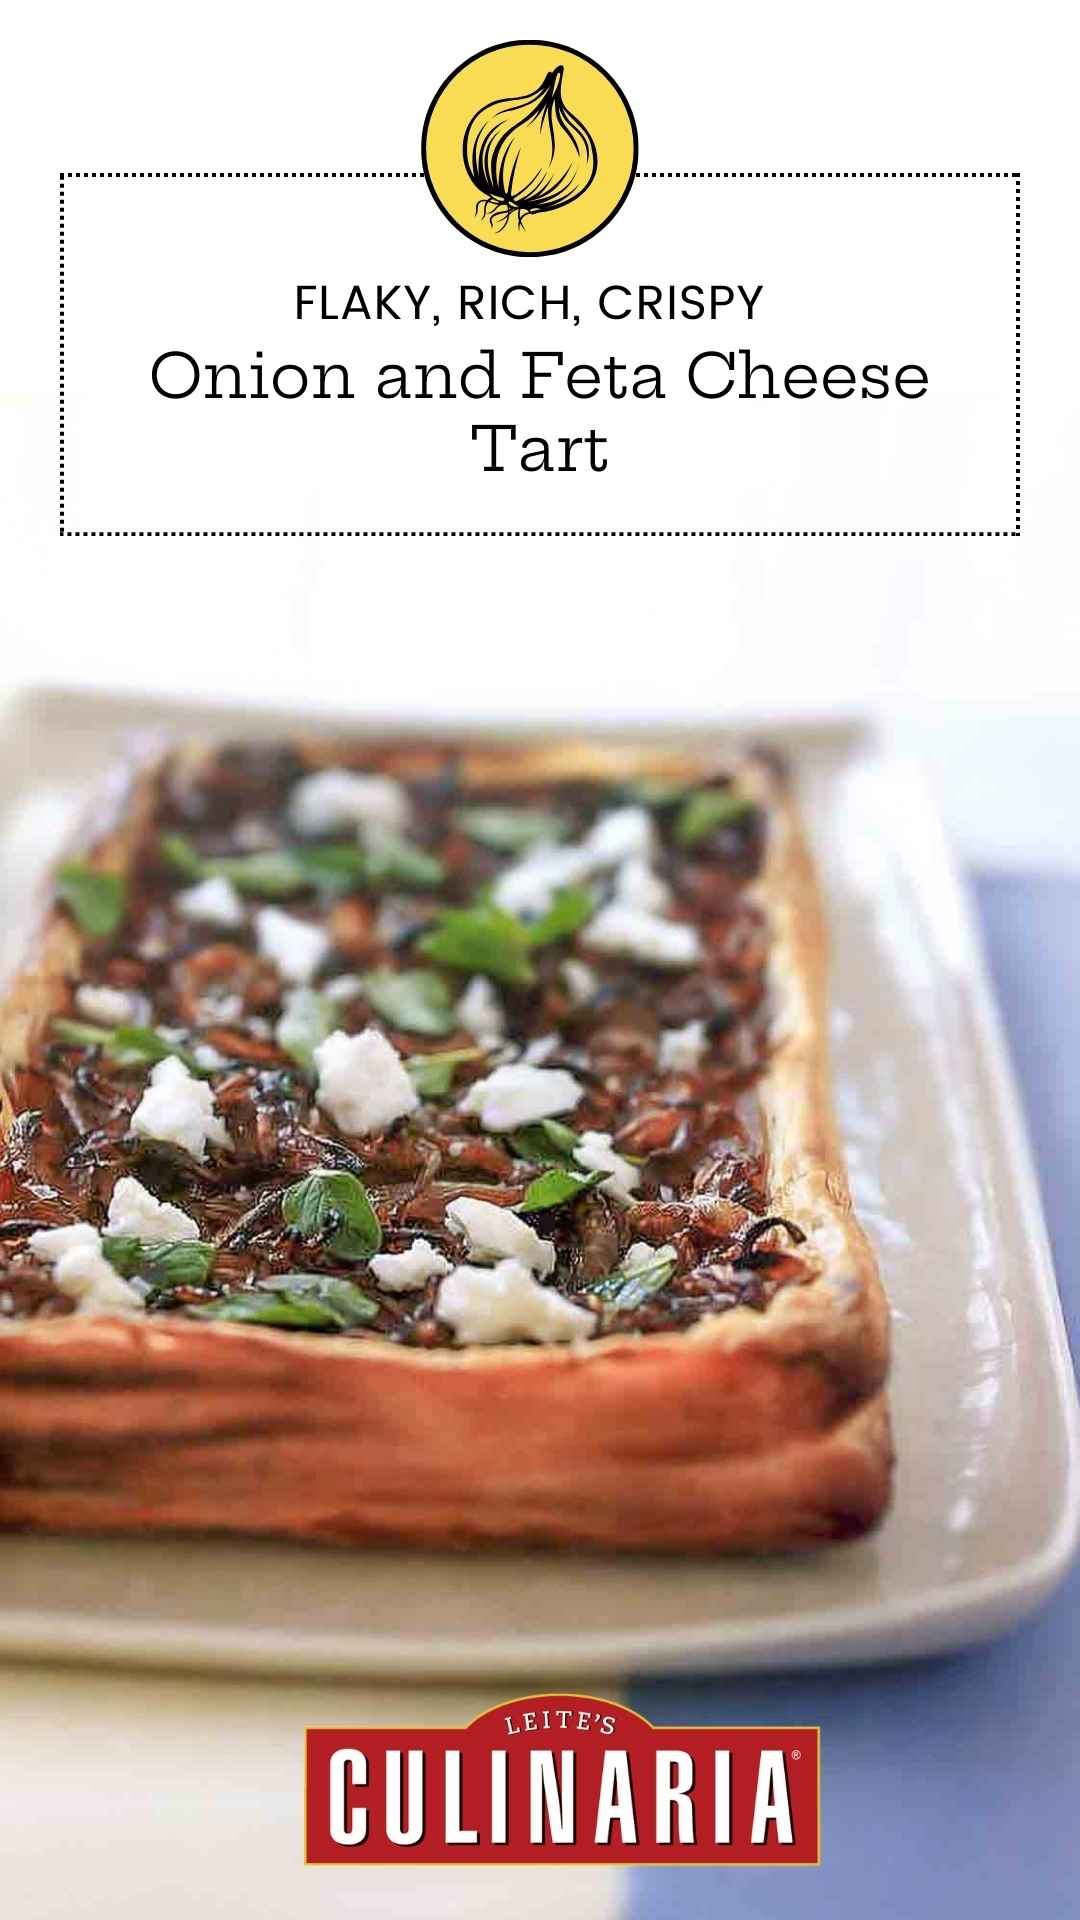 A whole puff pastry tart topped with caramelized onions, feta cheese, and oregano leaves on a rectangular platter.